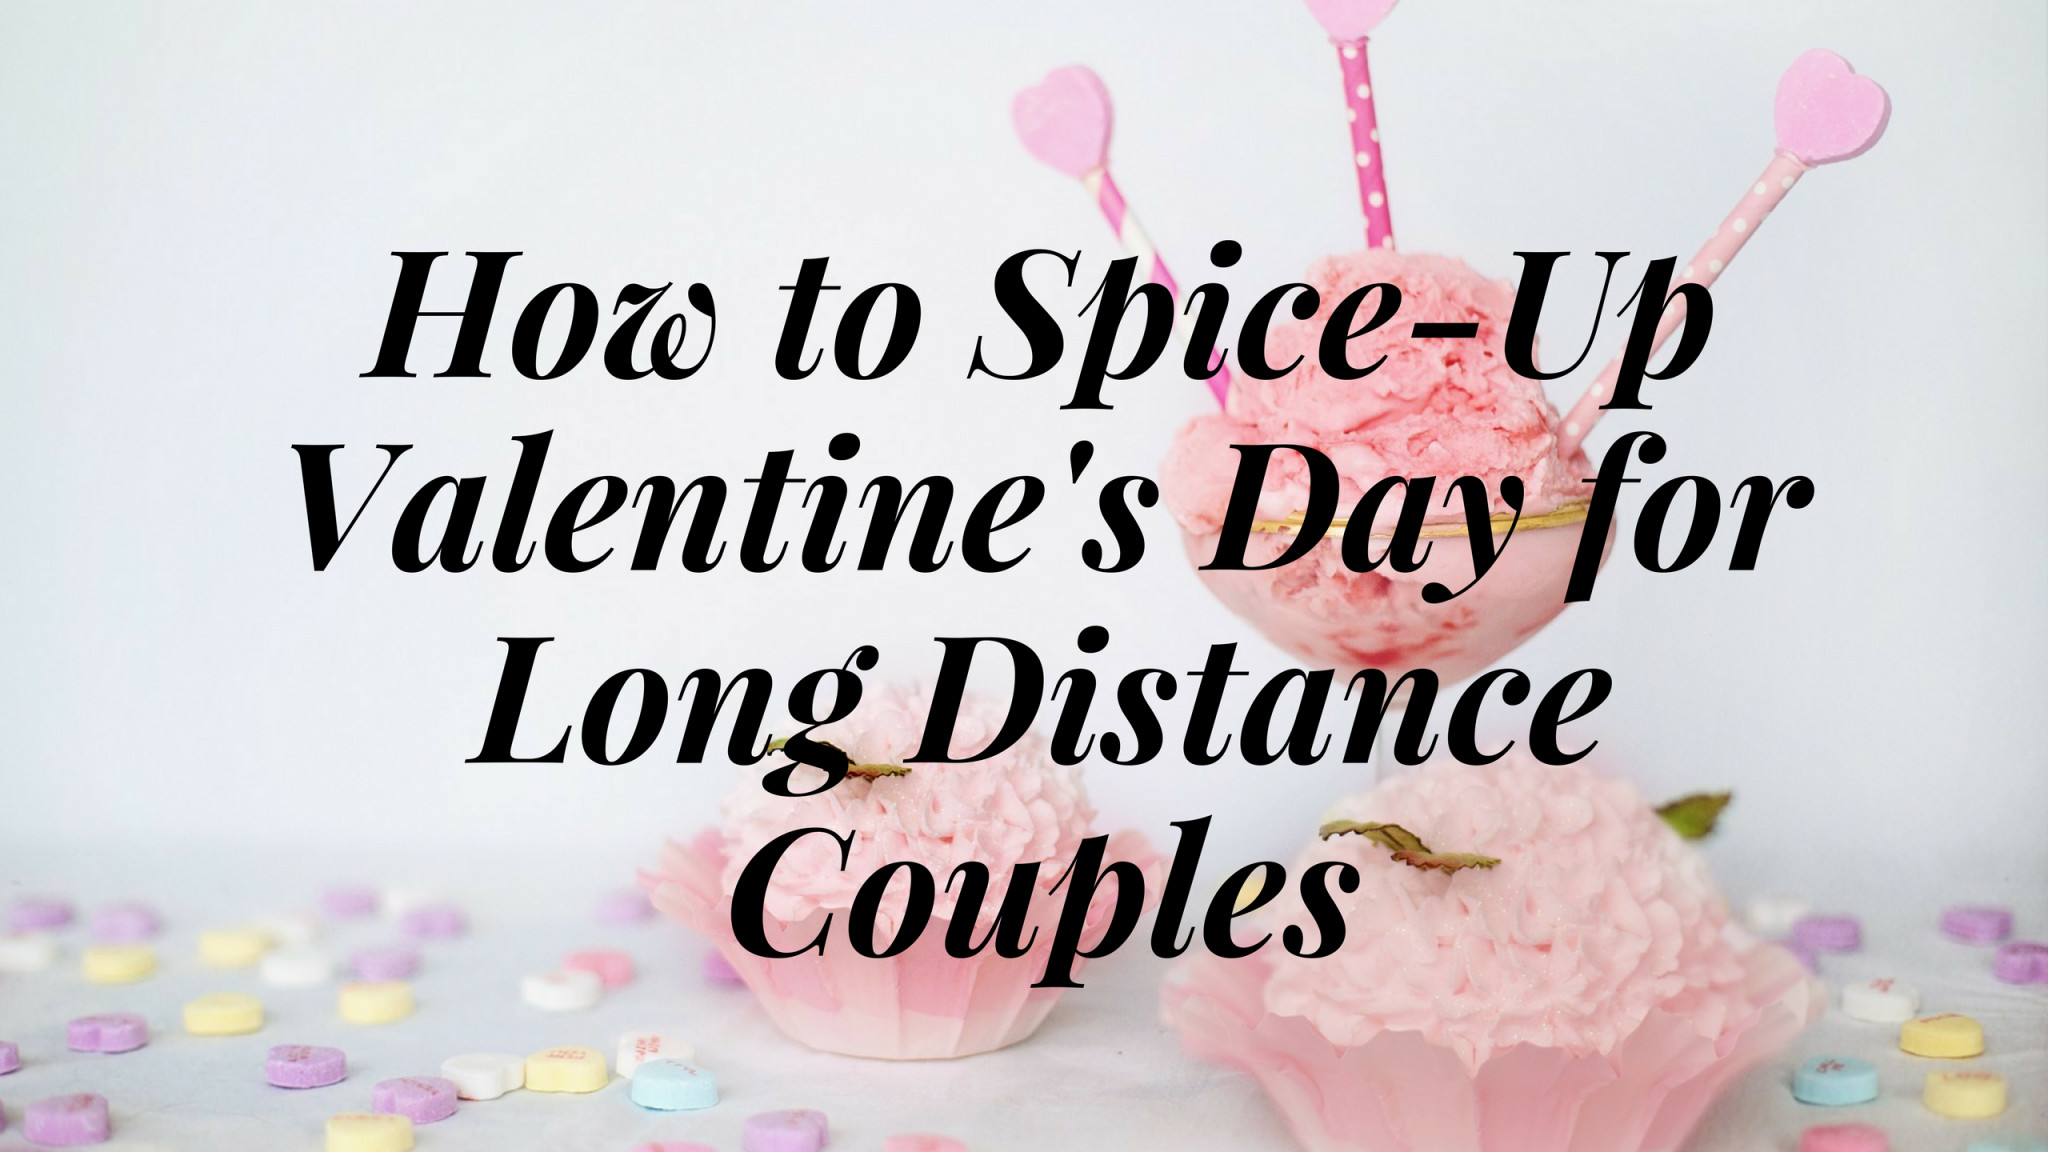 Valentines Day Ideas For Her Long Distance
 How to Spice Up Valentines Day for Long Distance Couples